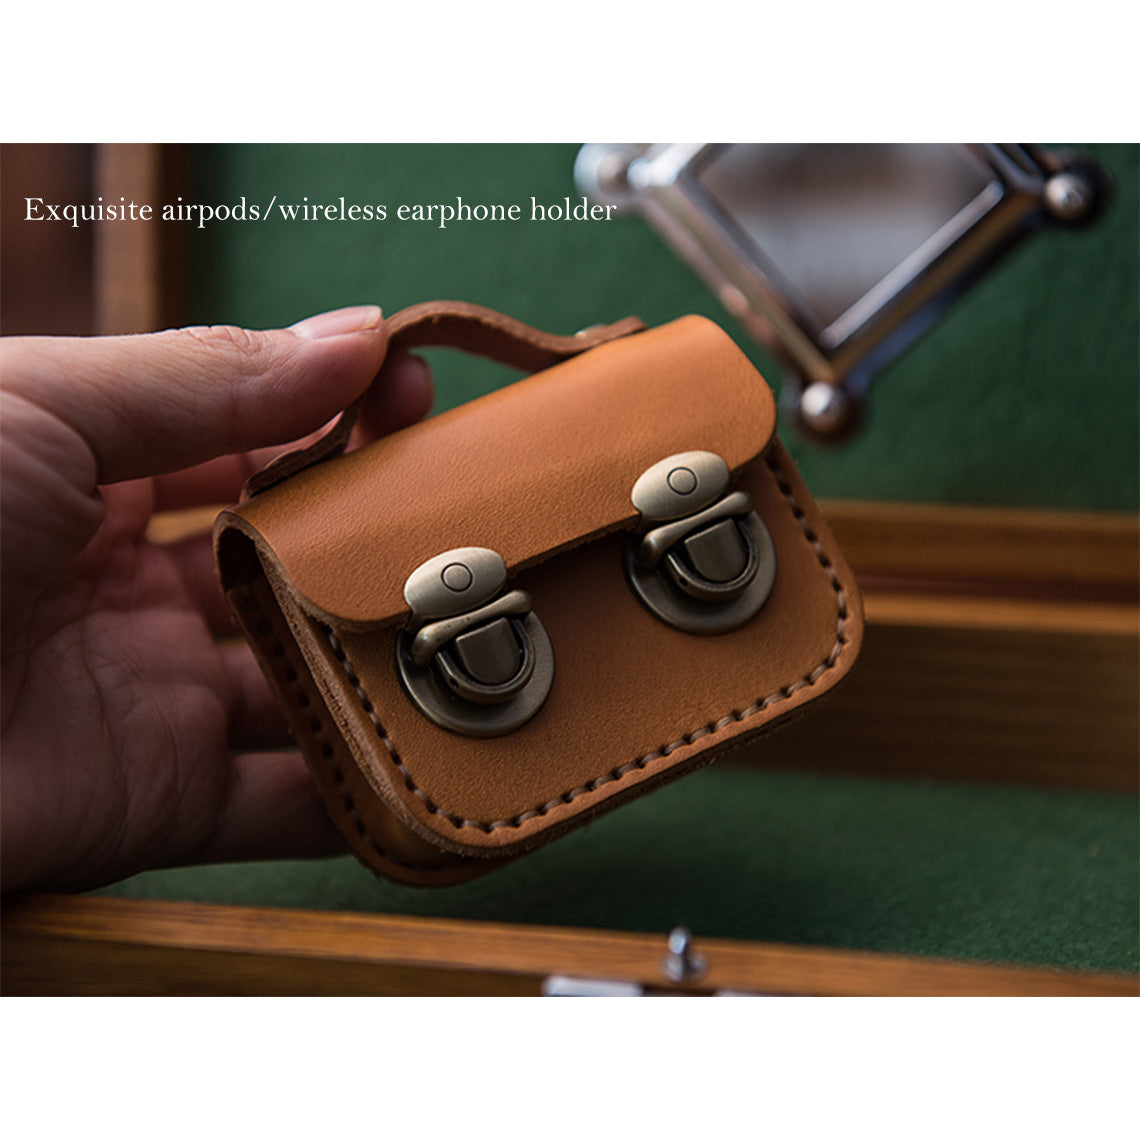 Funny airpod pro cases | diy airpods case leather tan